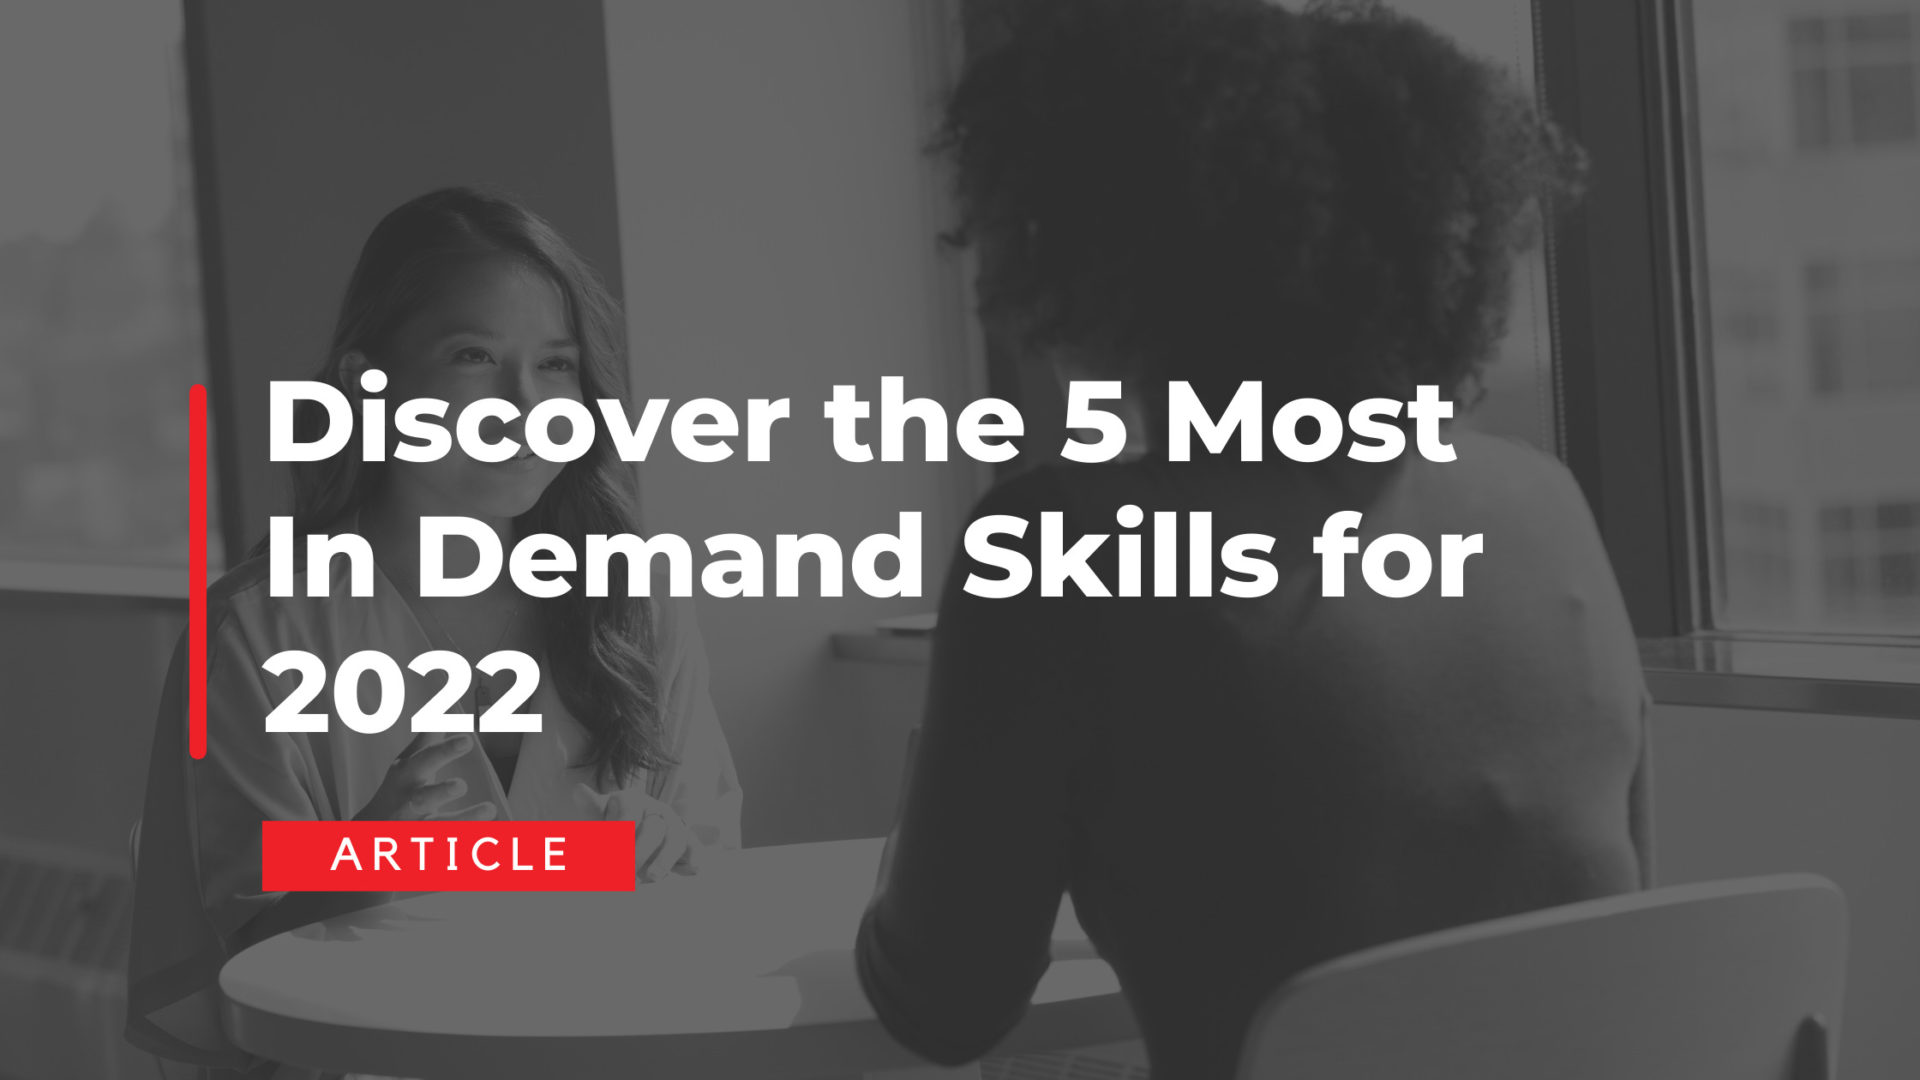 Discover the 5 Most In Demand Skills for 2022